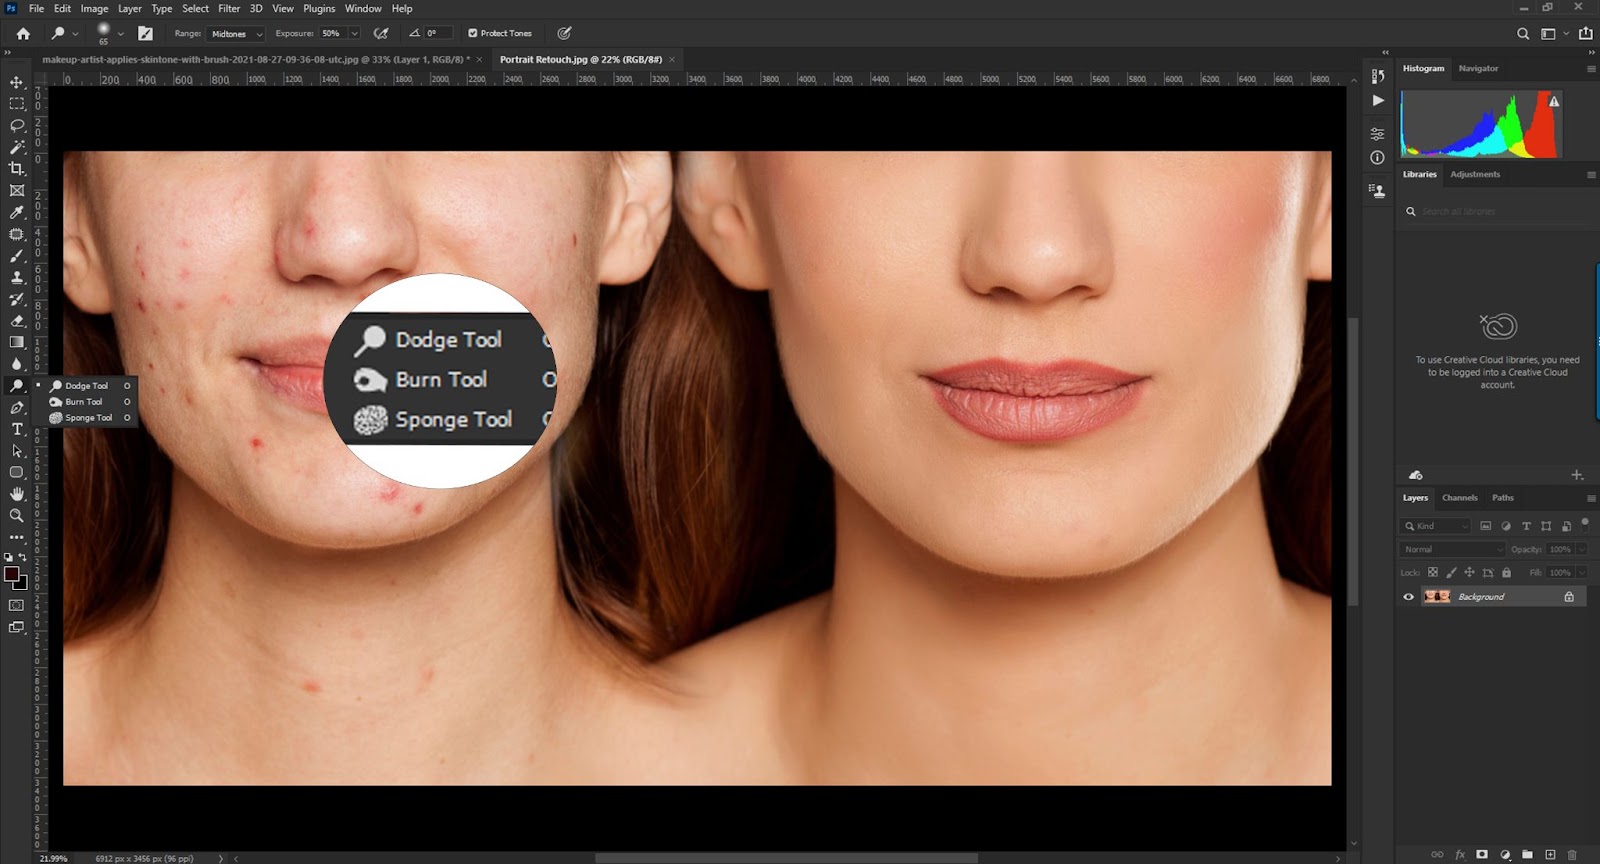 Portrait Retouch Dodge and Burn Tool